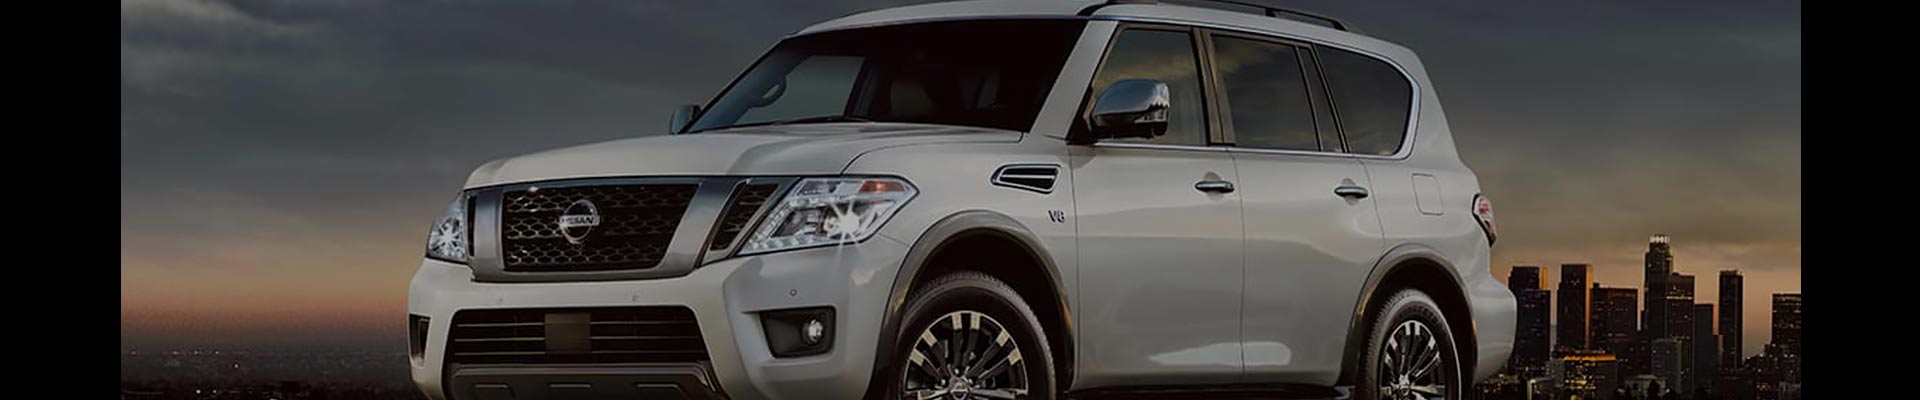 Shop Replacement and OEM 2011 Nissan Armada Parts with Discounted Price on the Net